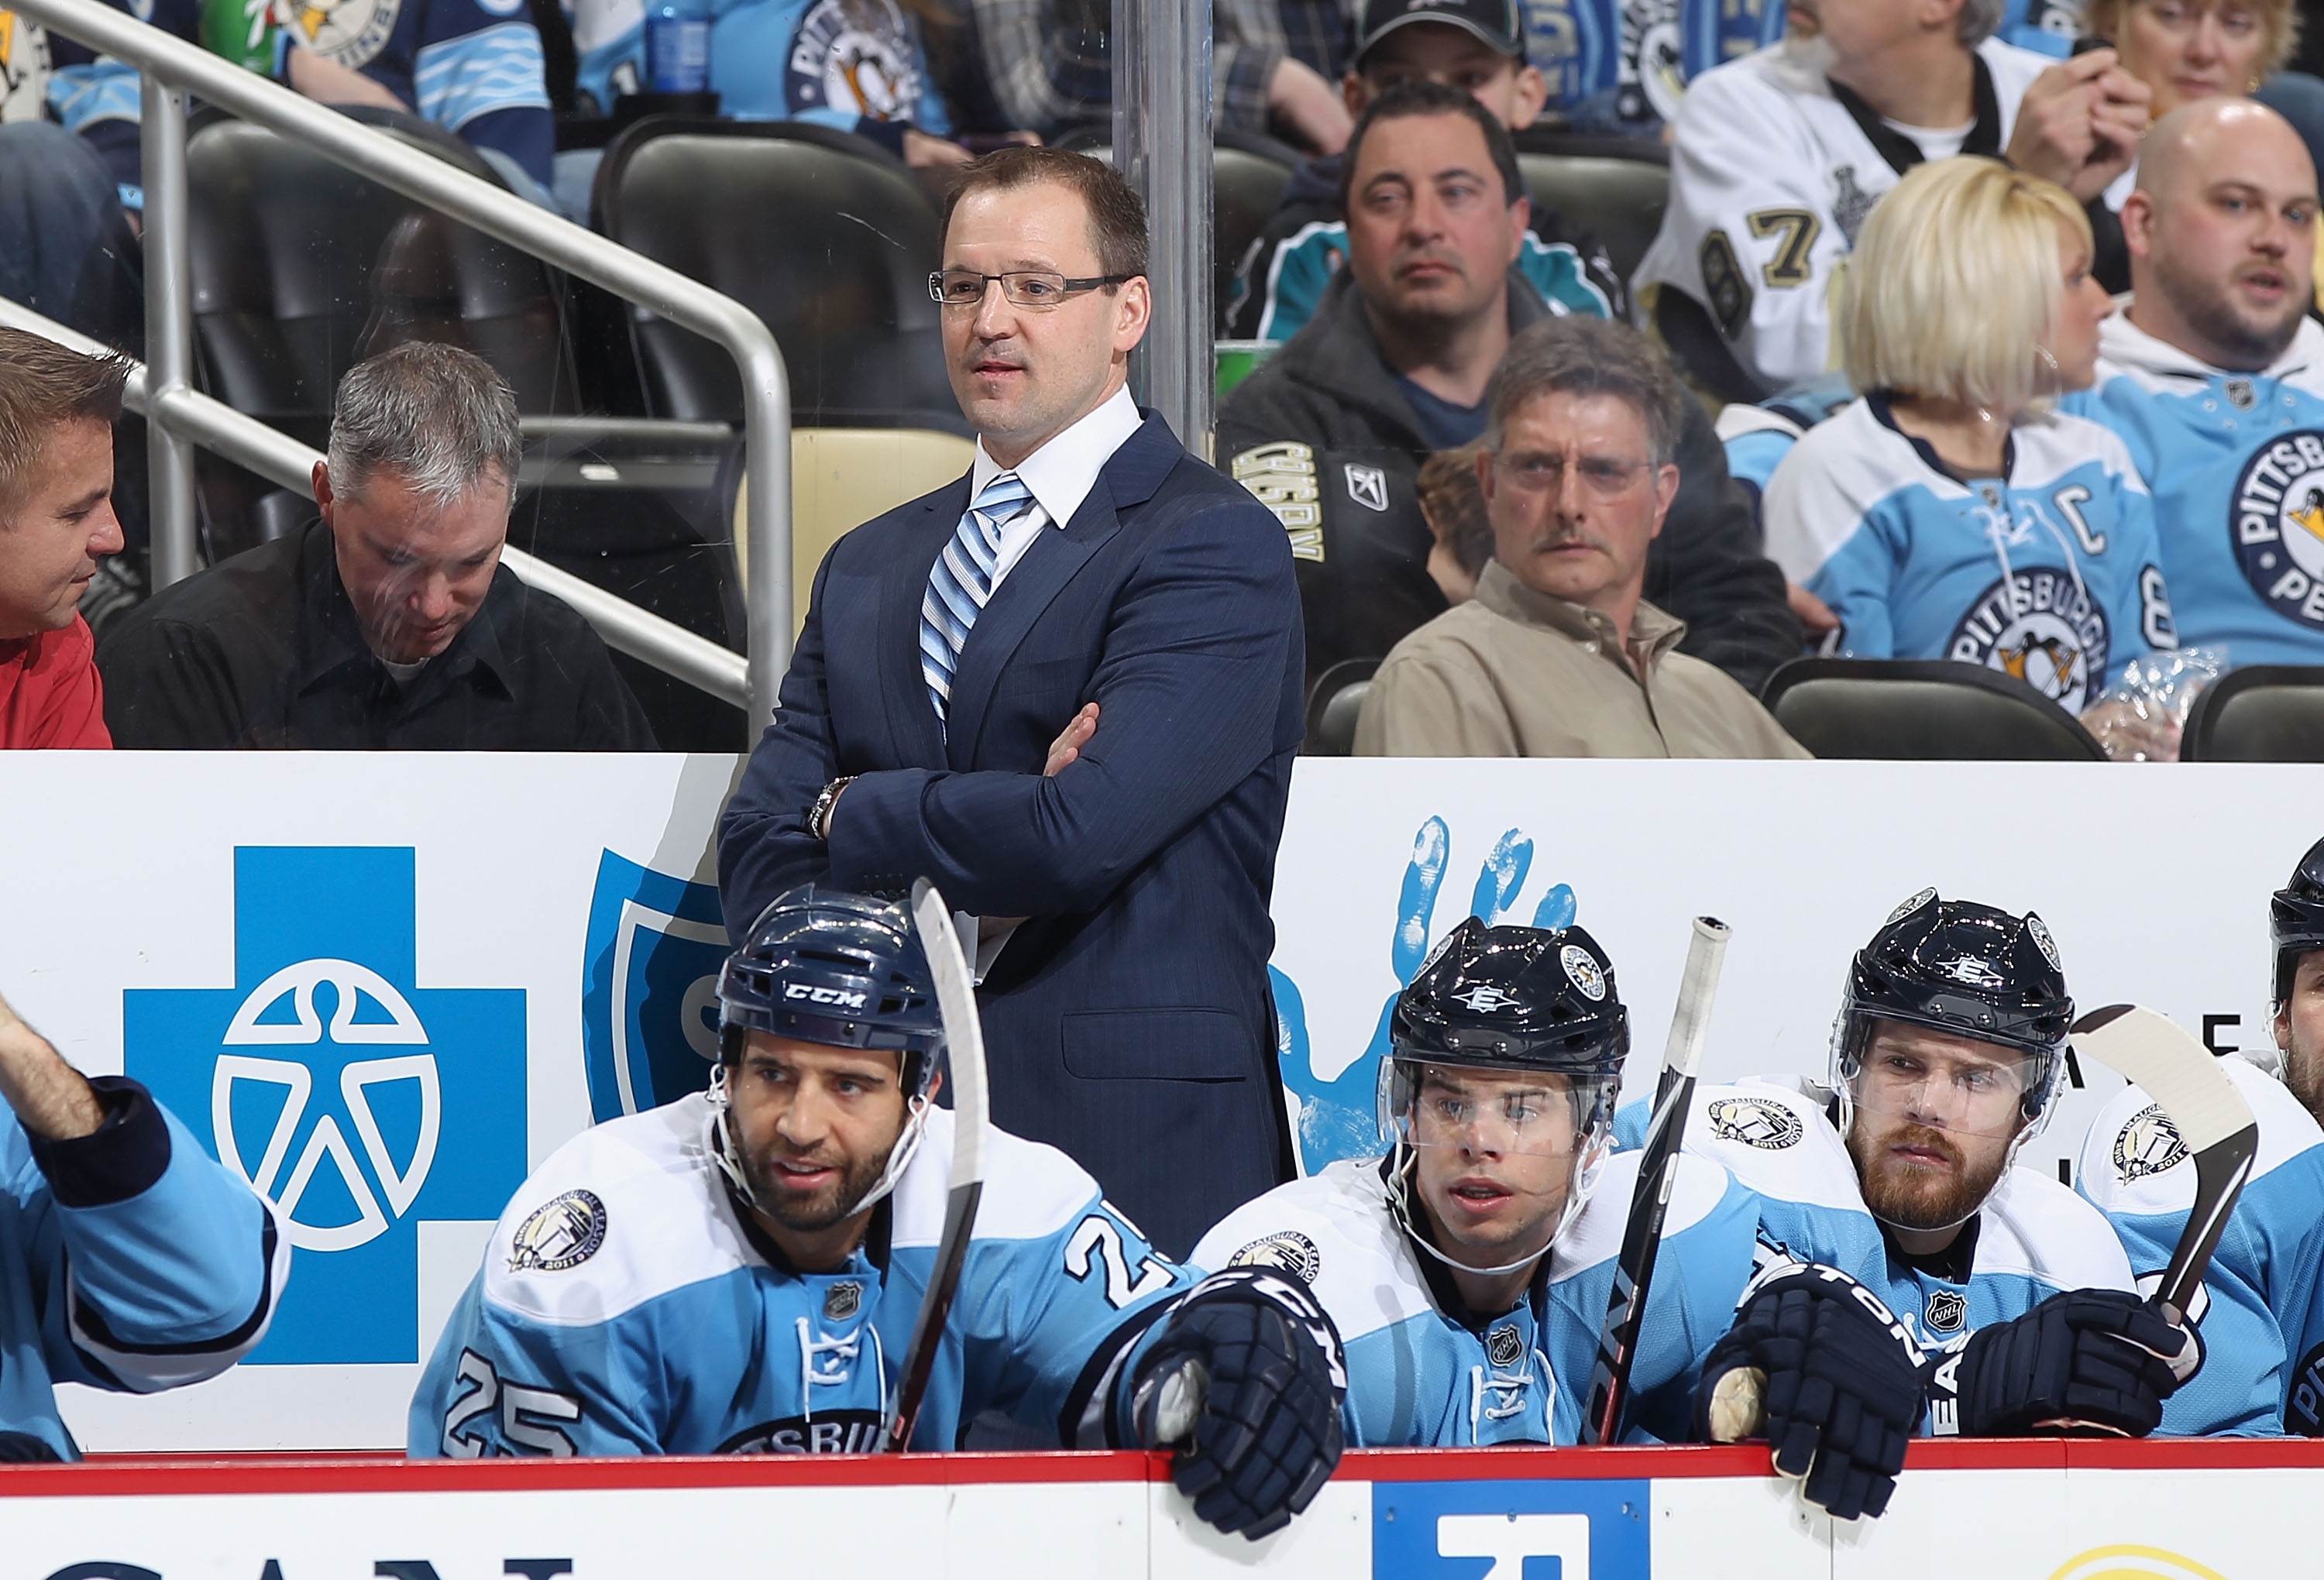 PITTSBURGH, PA - FEBRUARY 23:  Head coach Dan Bylsma of the Pittsburgh Penguins watches from the bench during the NHL game against the San Jose Sharks at Consol Energy Center on February 23, 2011 in Pittsburgh, Pennsylvania.  The Sharks defeated the Pengu